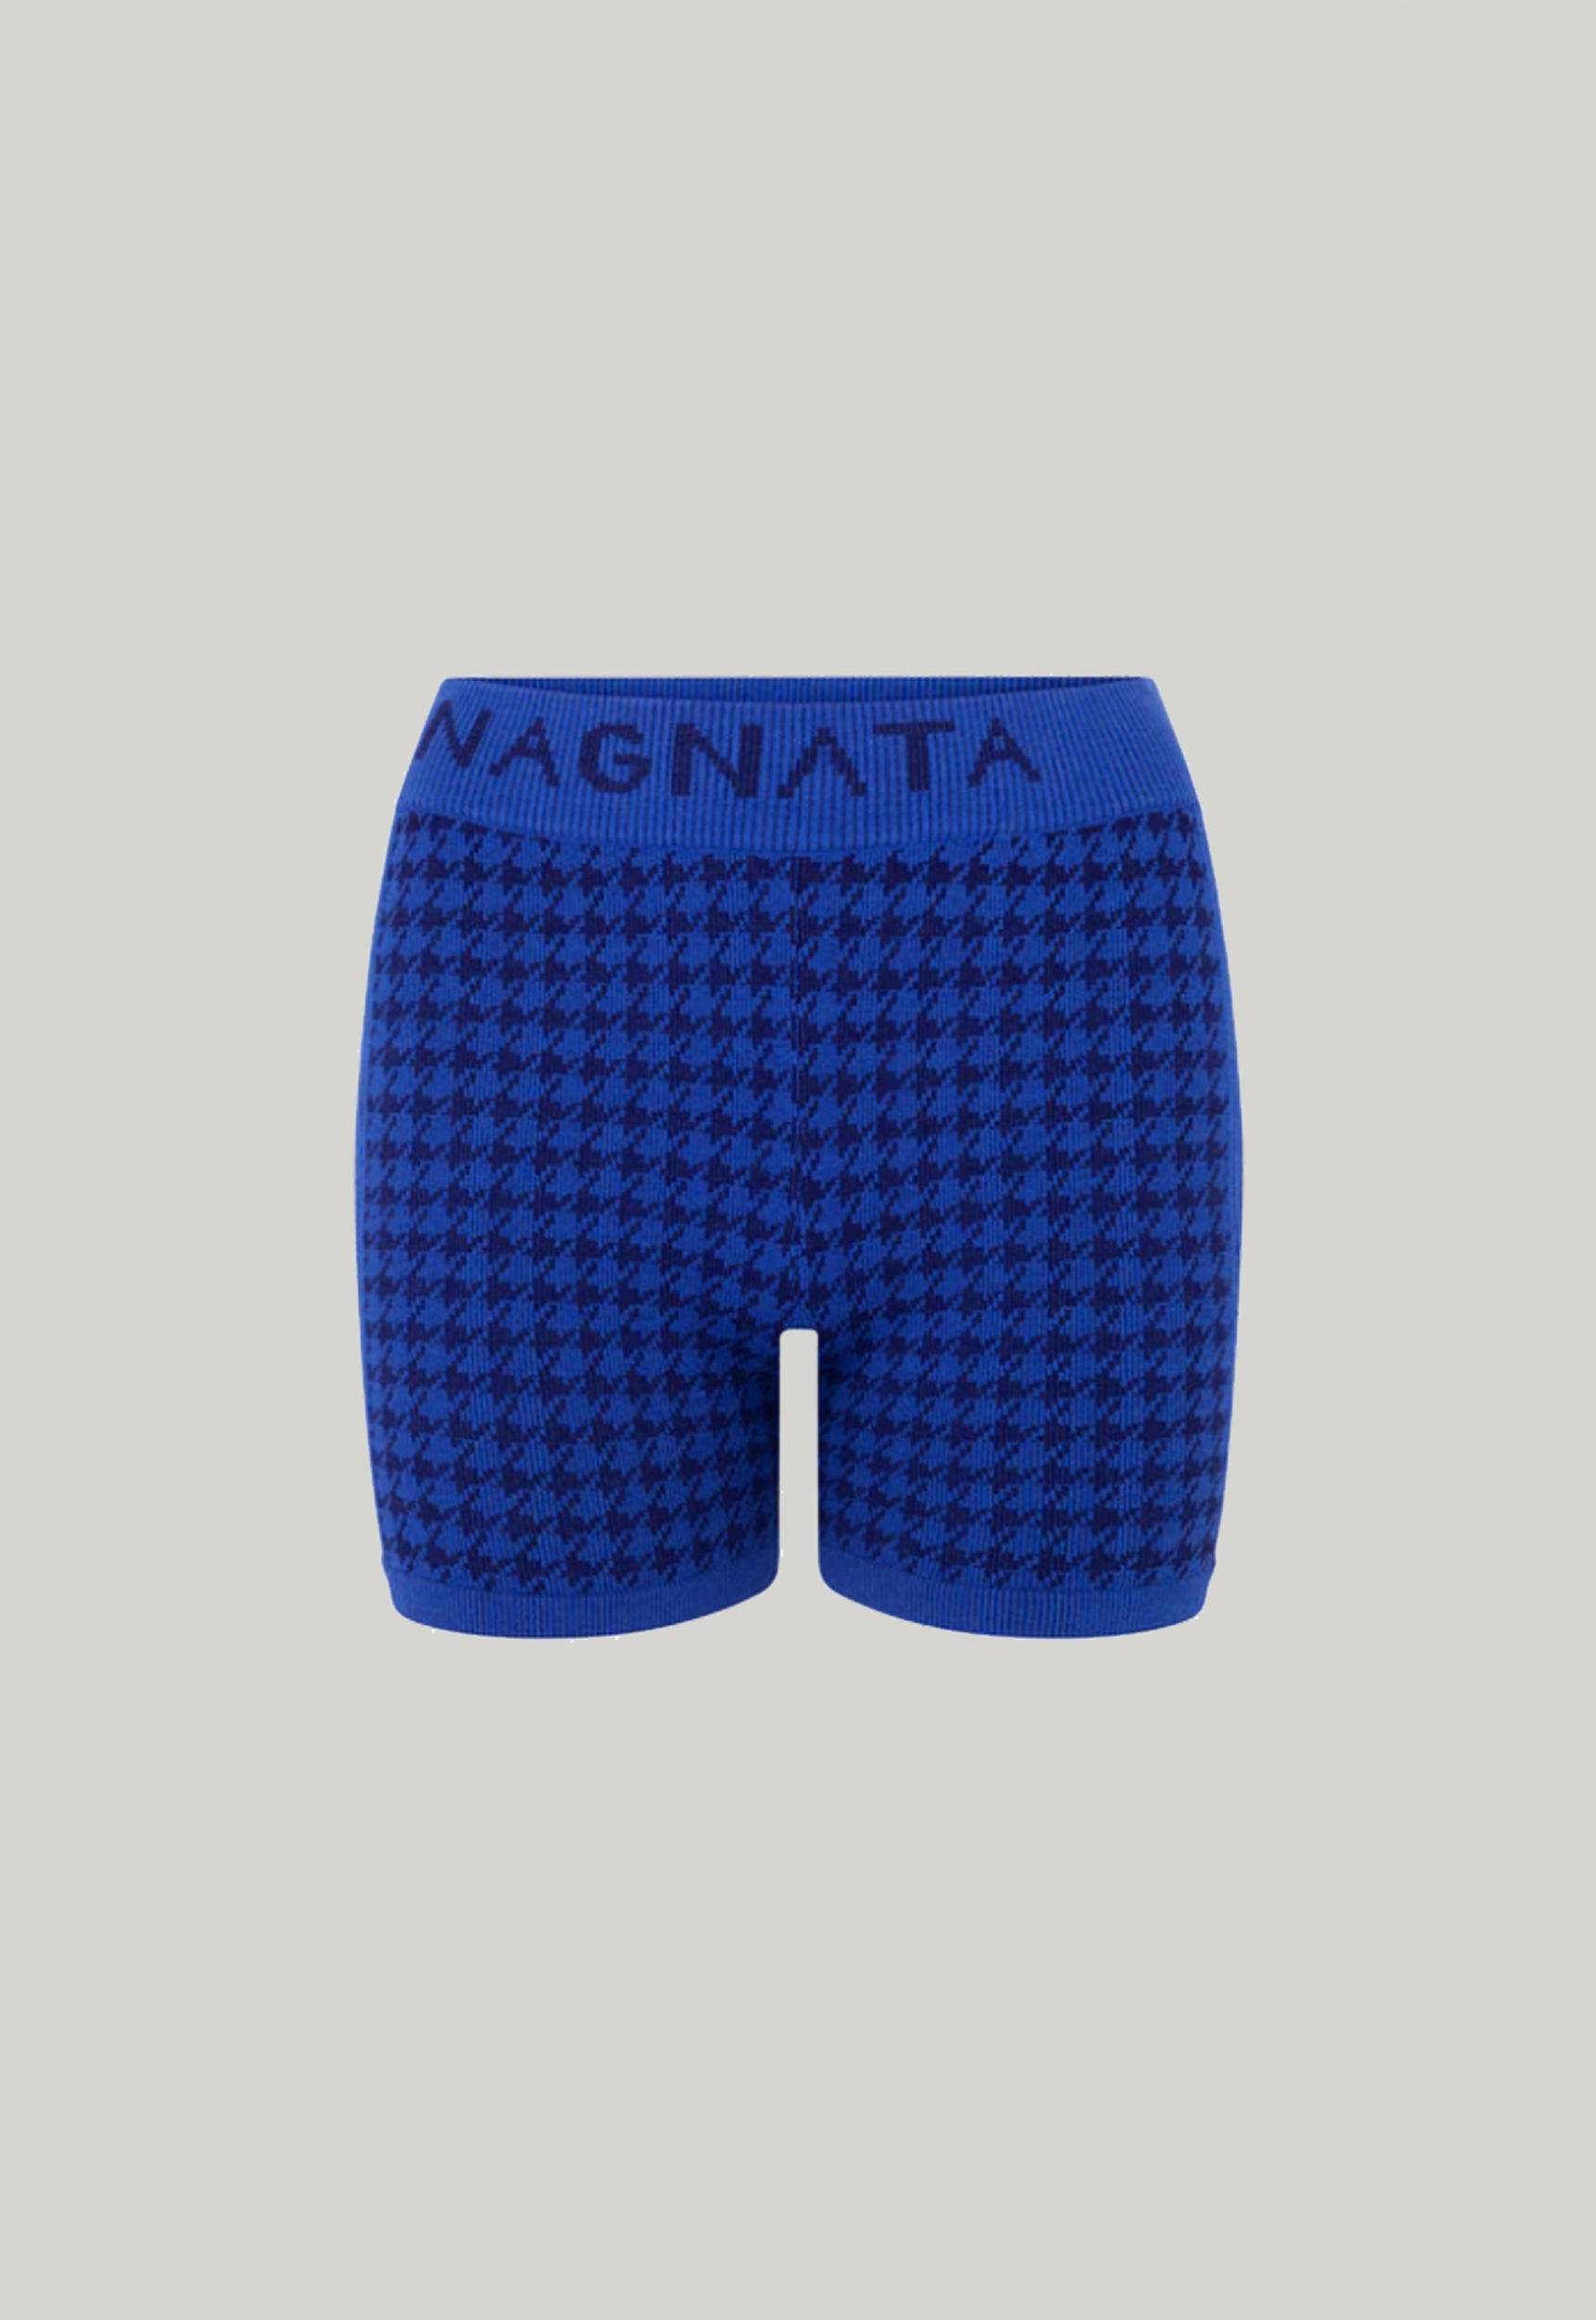 Jac+Jack NAGNATA CHECKED OUT KNIT SHORT in Navy/Cobalt